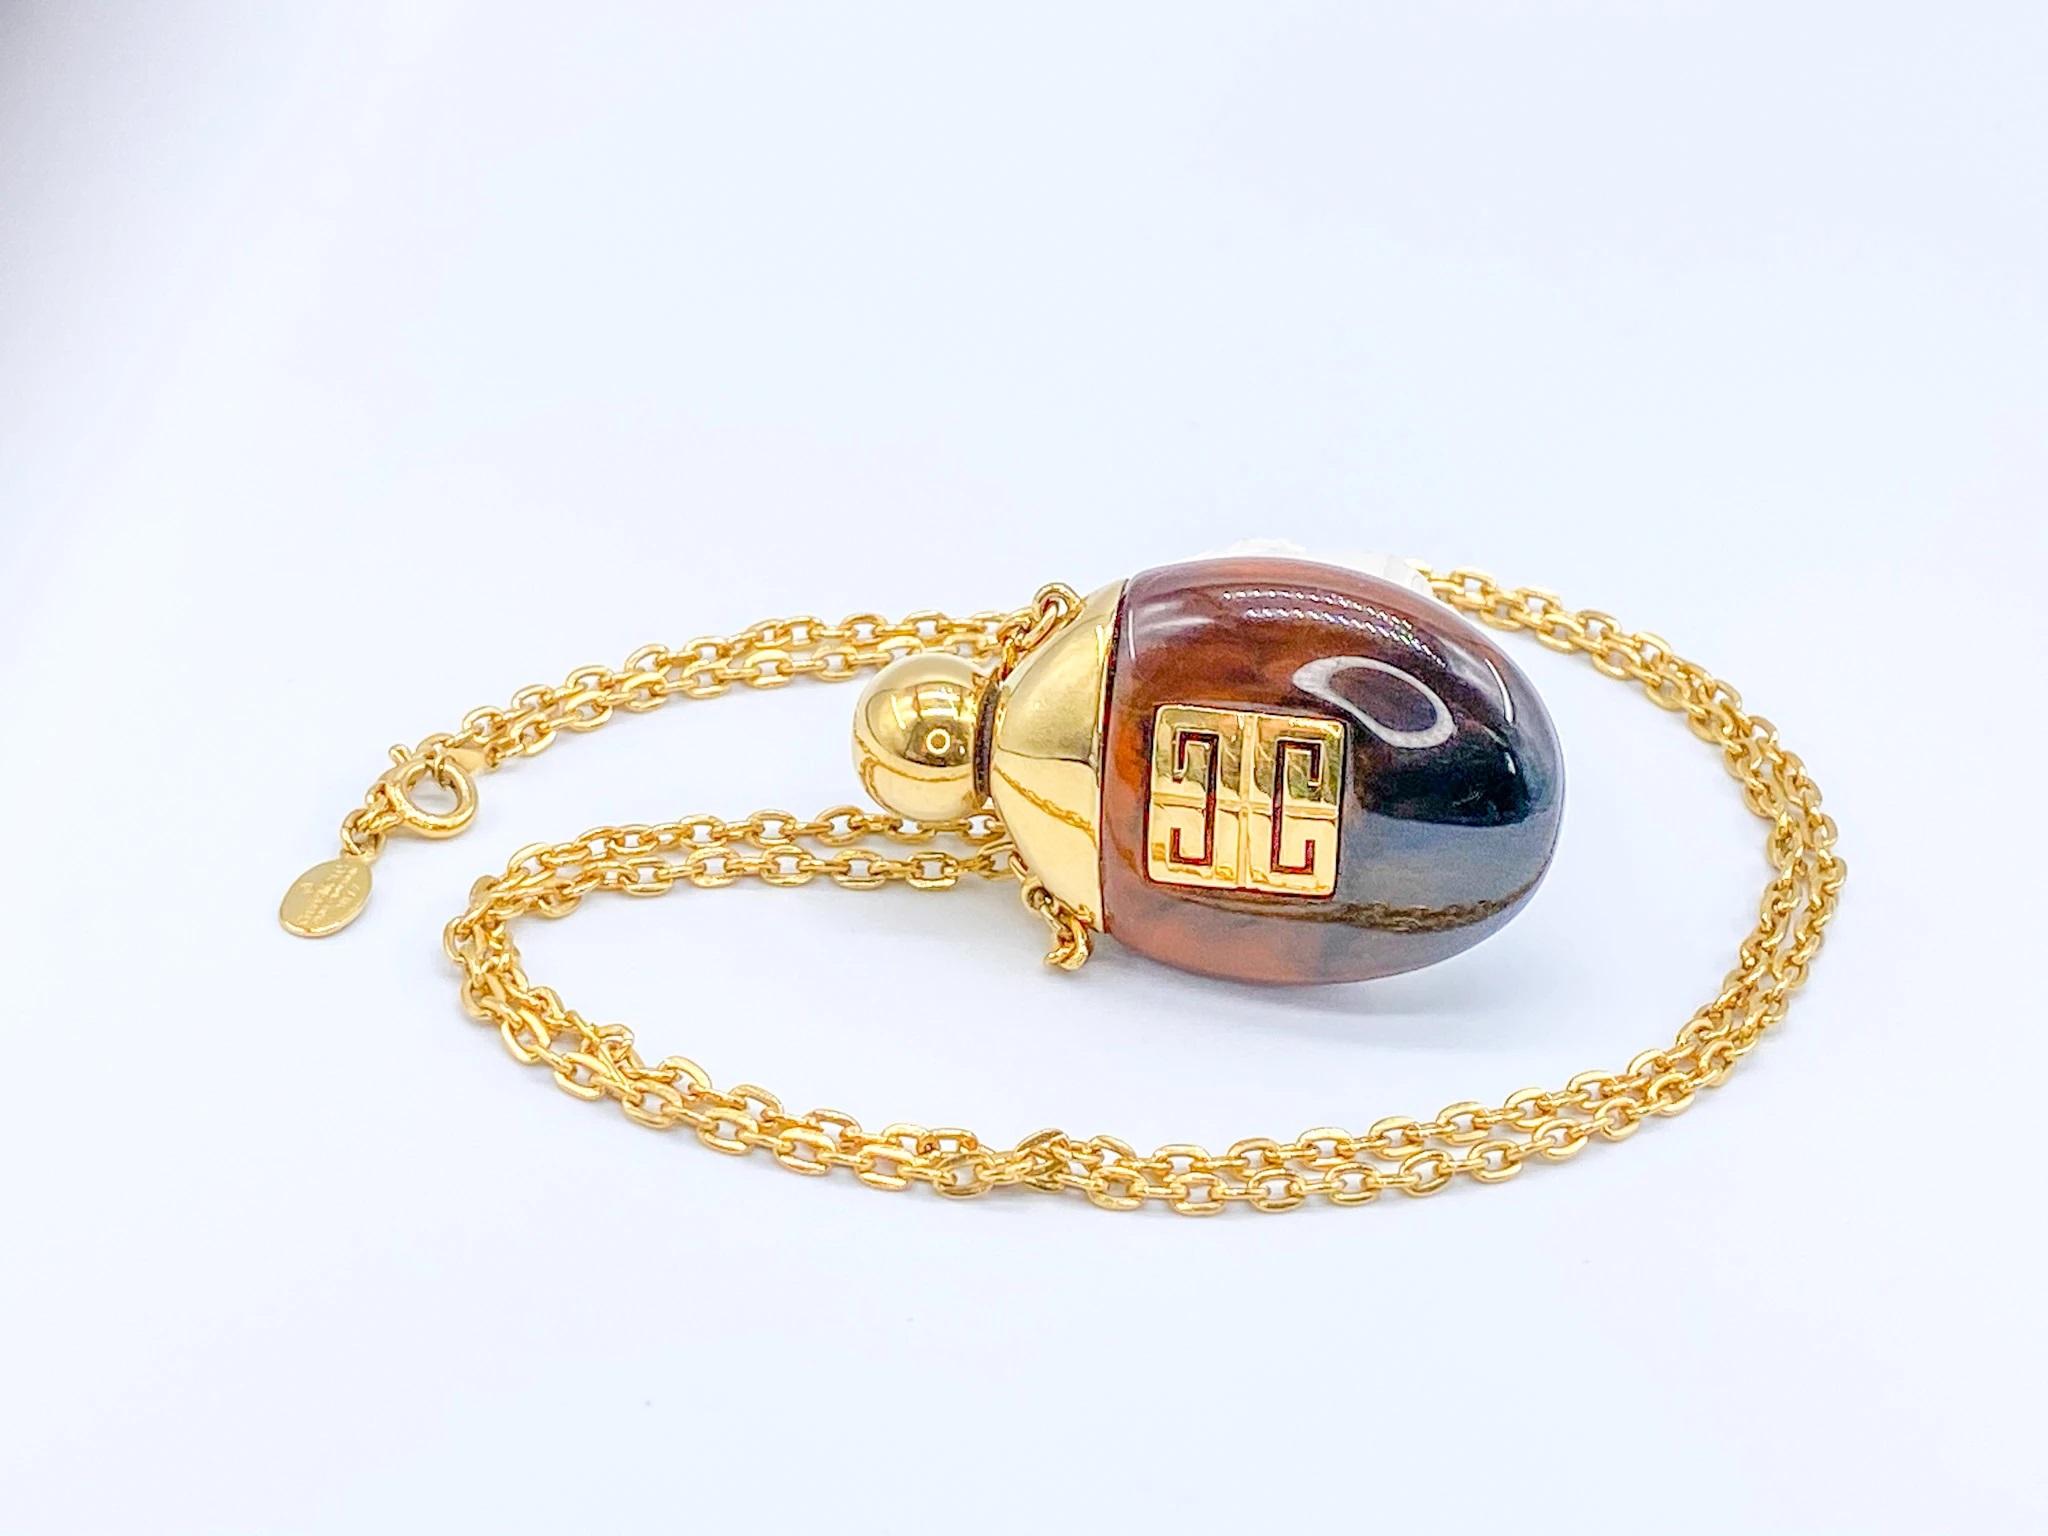 Givenchy 1970s Perfume Bottle Pendant Necklace Vintage. 

Givenchy 1977 vintage faux tortoiseshell perfume bottle necklace. Features the iconic Givenchy logo, first introduced in the 1970's. A classic and iconic piece from Givenchy's heyday. 

Fully